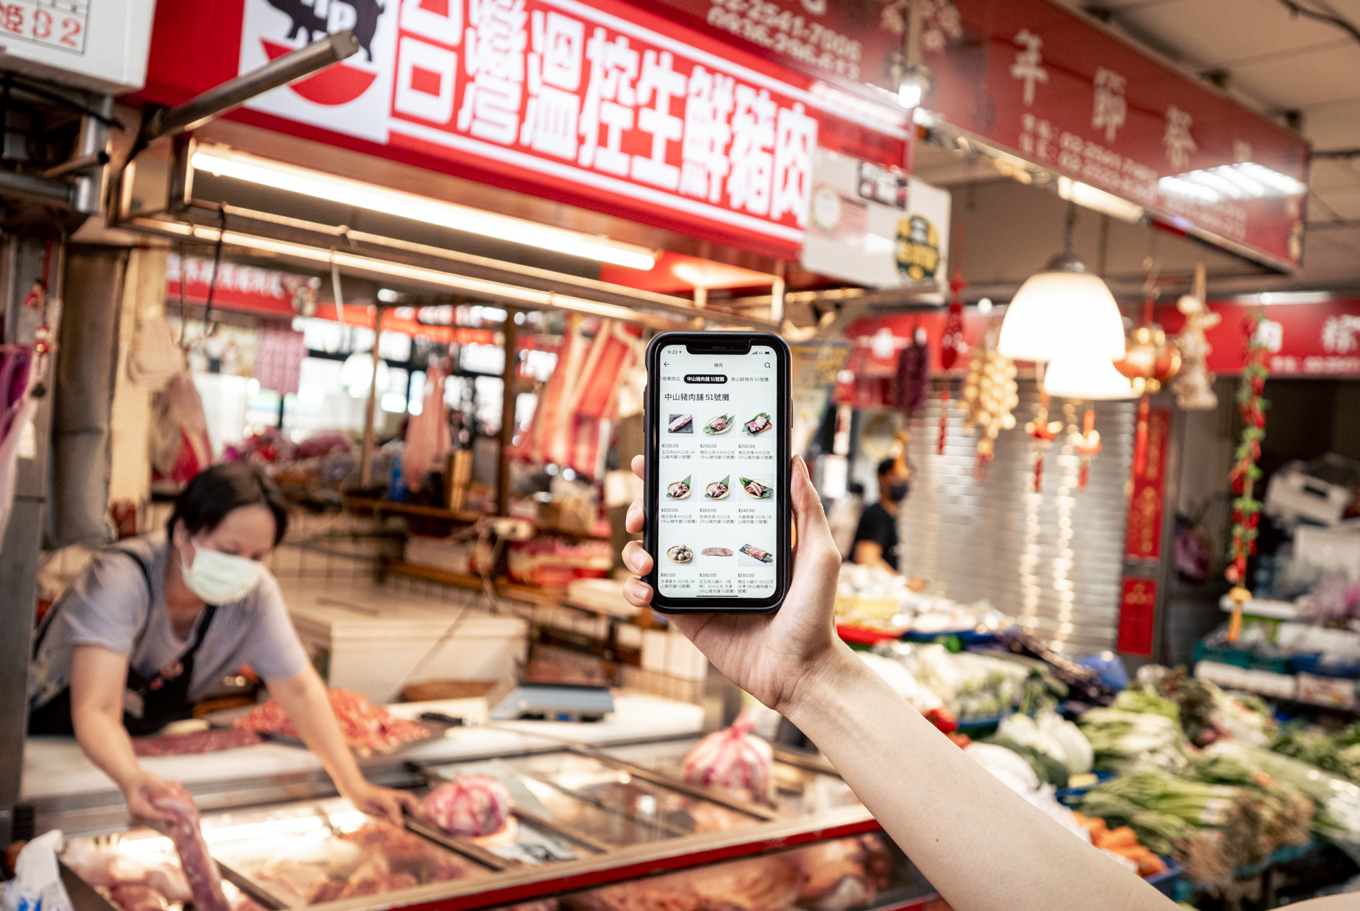 Market stalls use online live broadcasts to change the habit of people visiting the markets. Photo/Retrieved from "Upstream and Downstream"